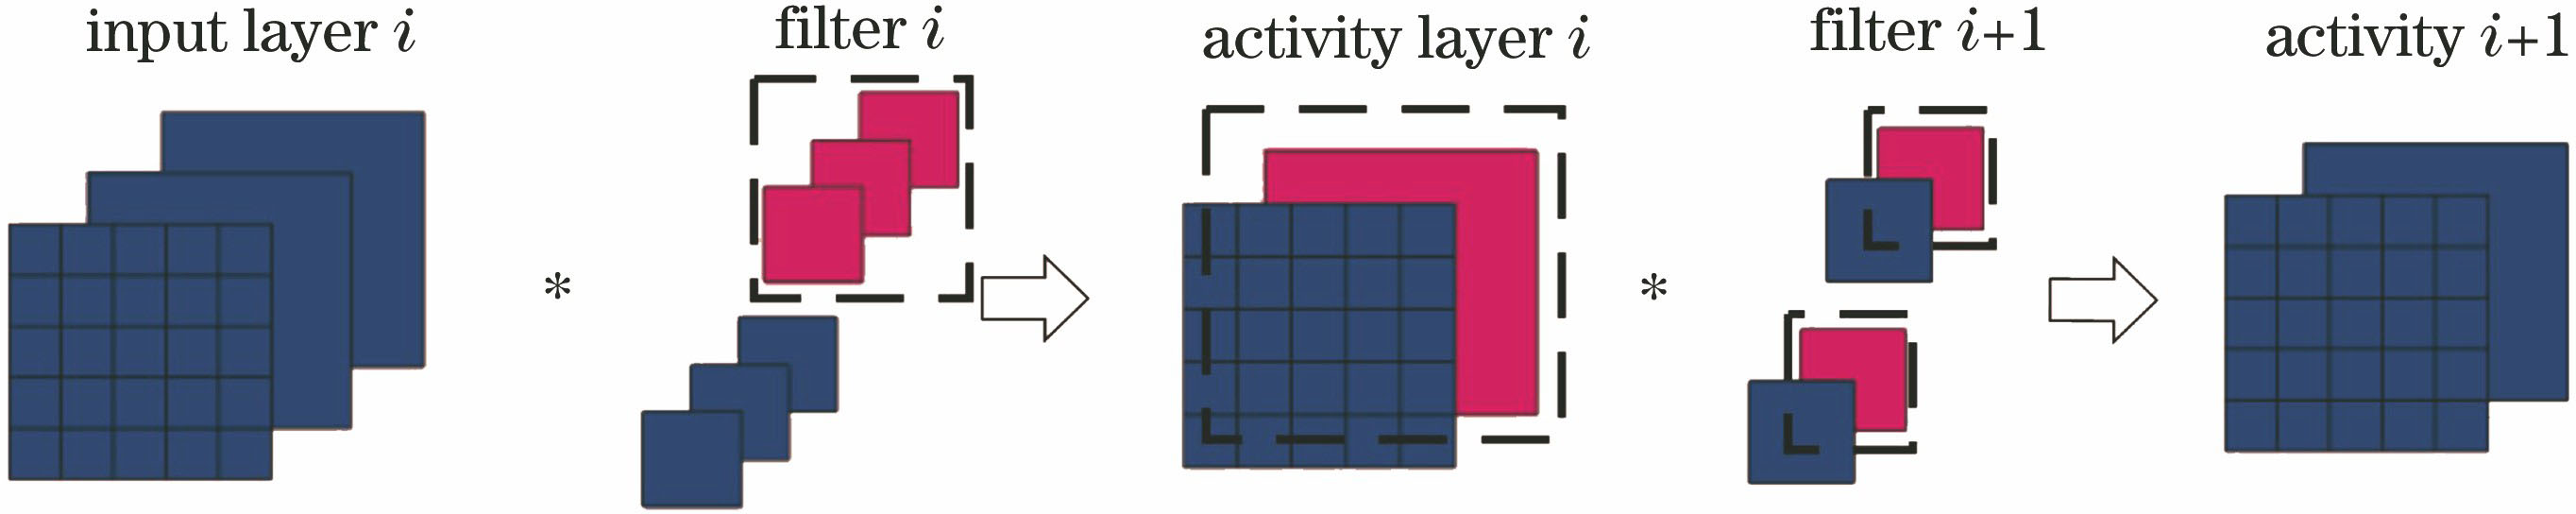 Schematic of convolutional neutral network